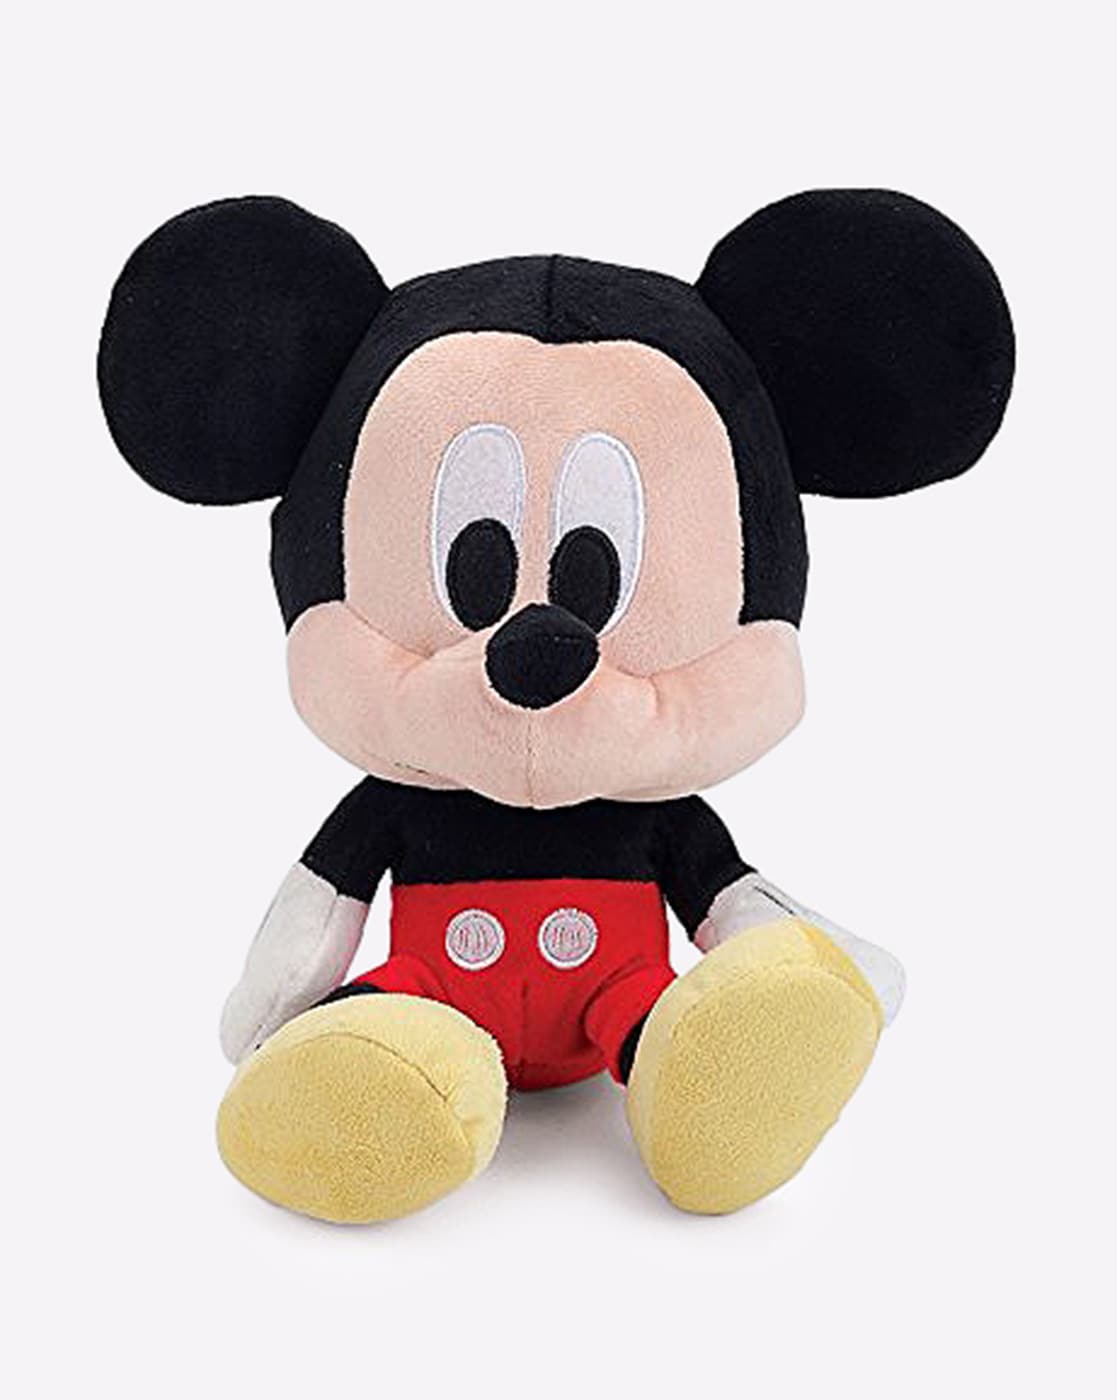 mickey mouse soft toy online